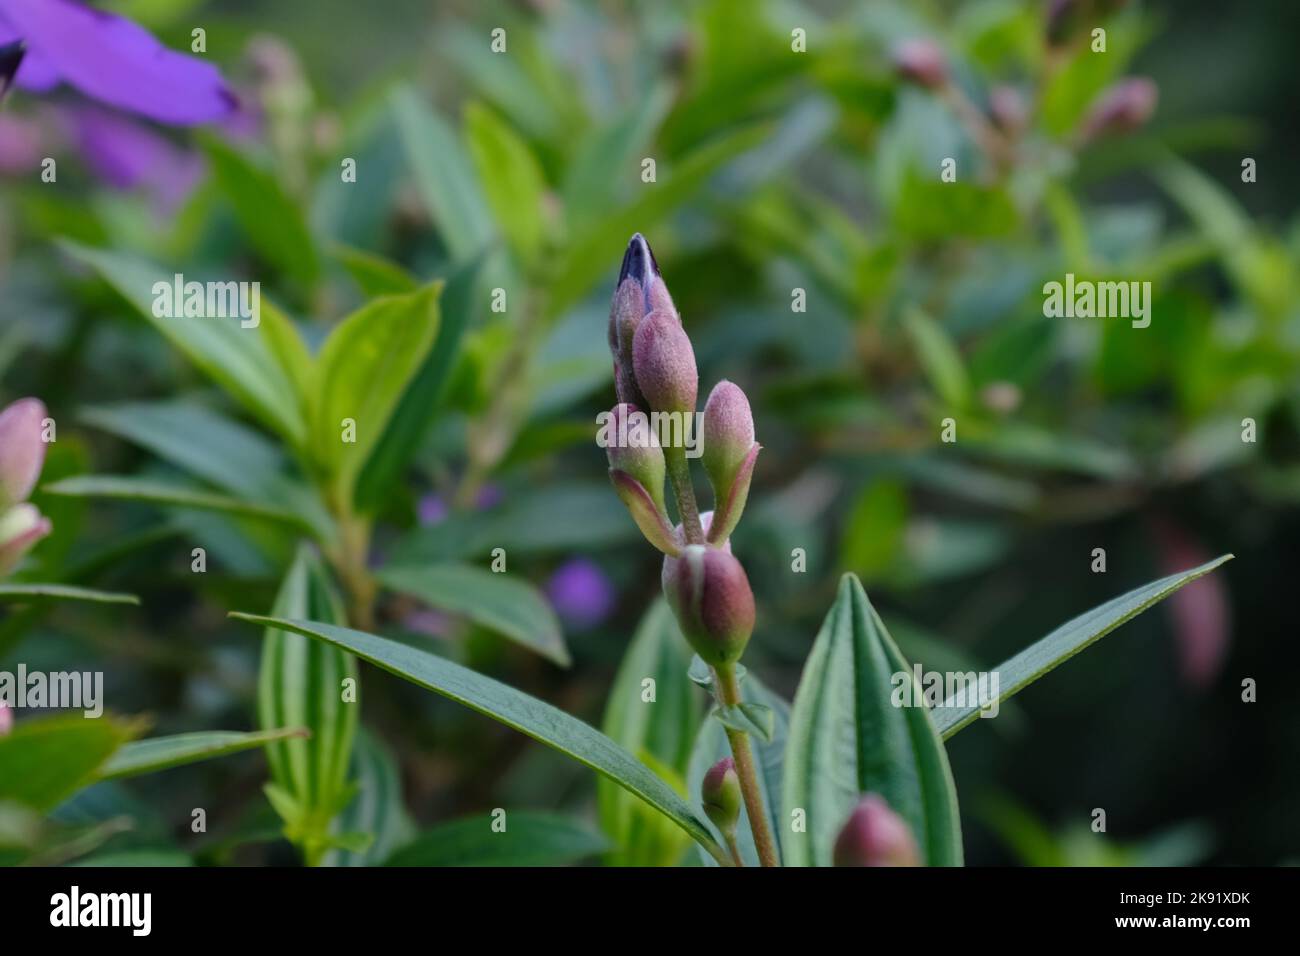 A shallow focus shot of Tibouchina flower buds with green leaves Stock Photo